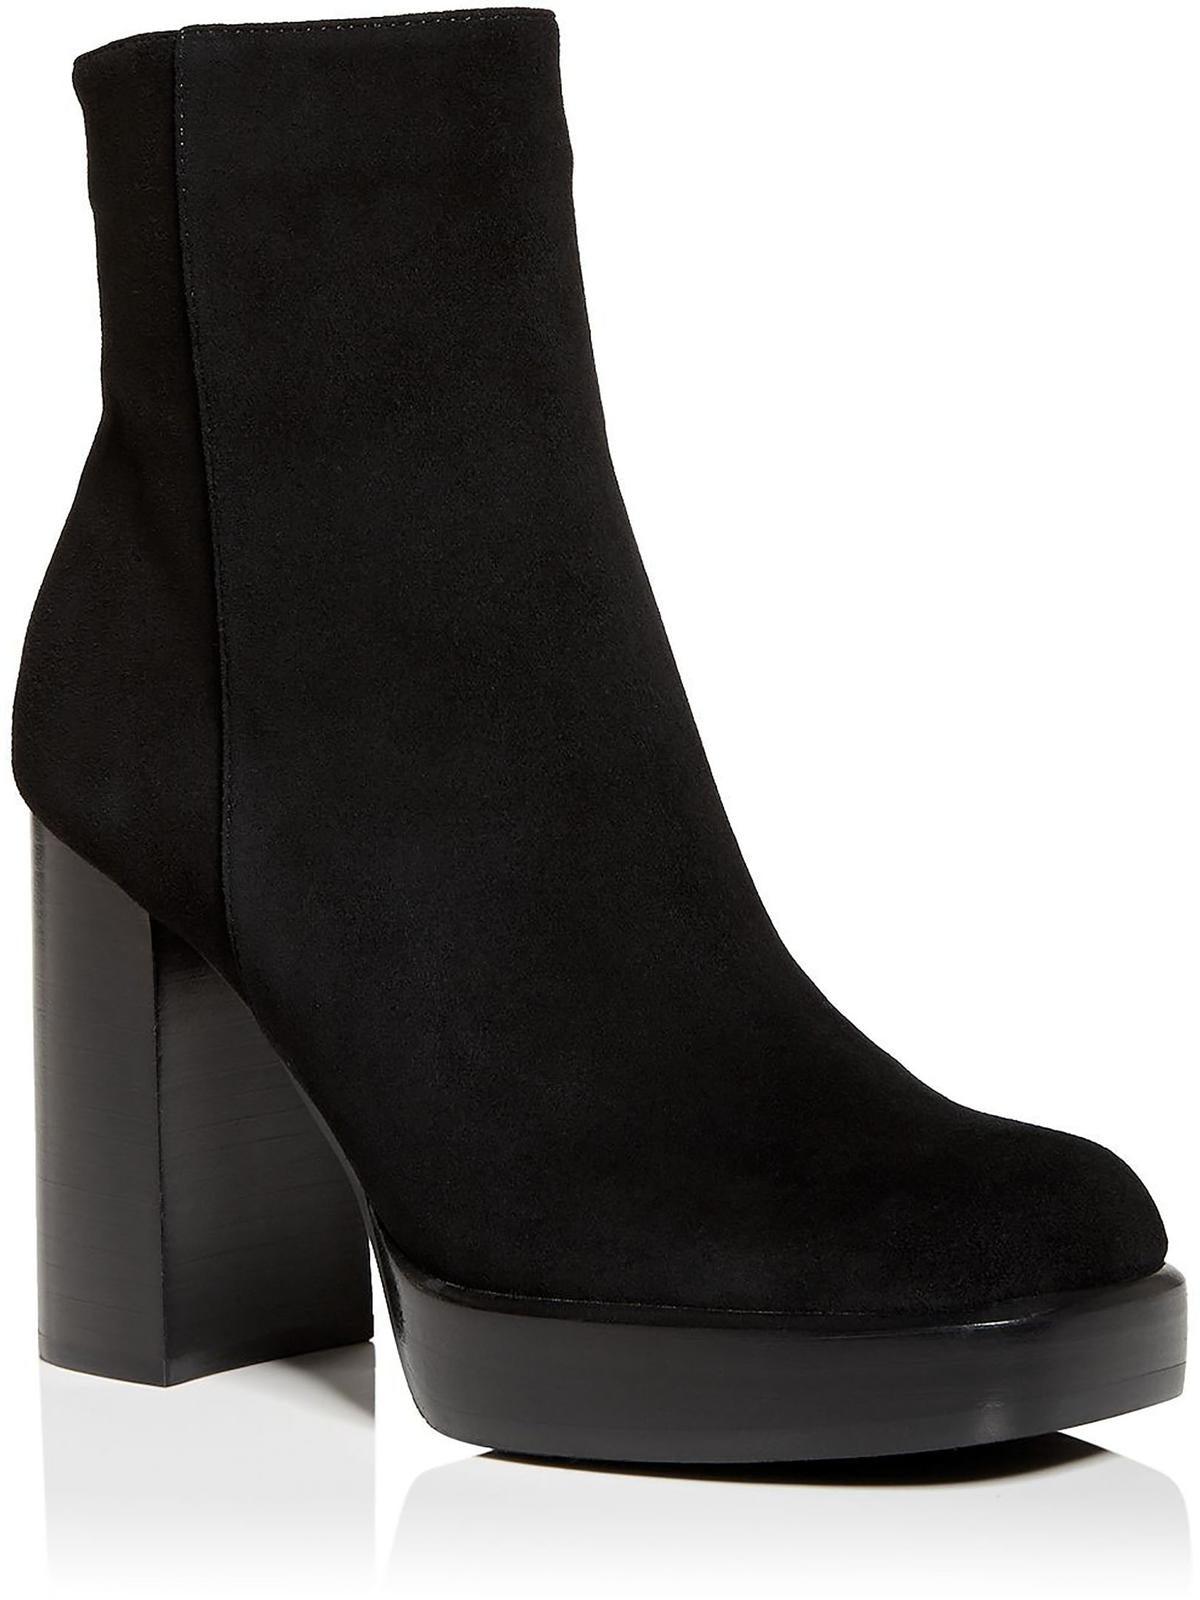 Jeffrey Campbell Spaced Square Toe Platform Ankle Boots in Black | Lyst